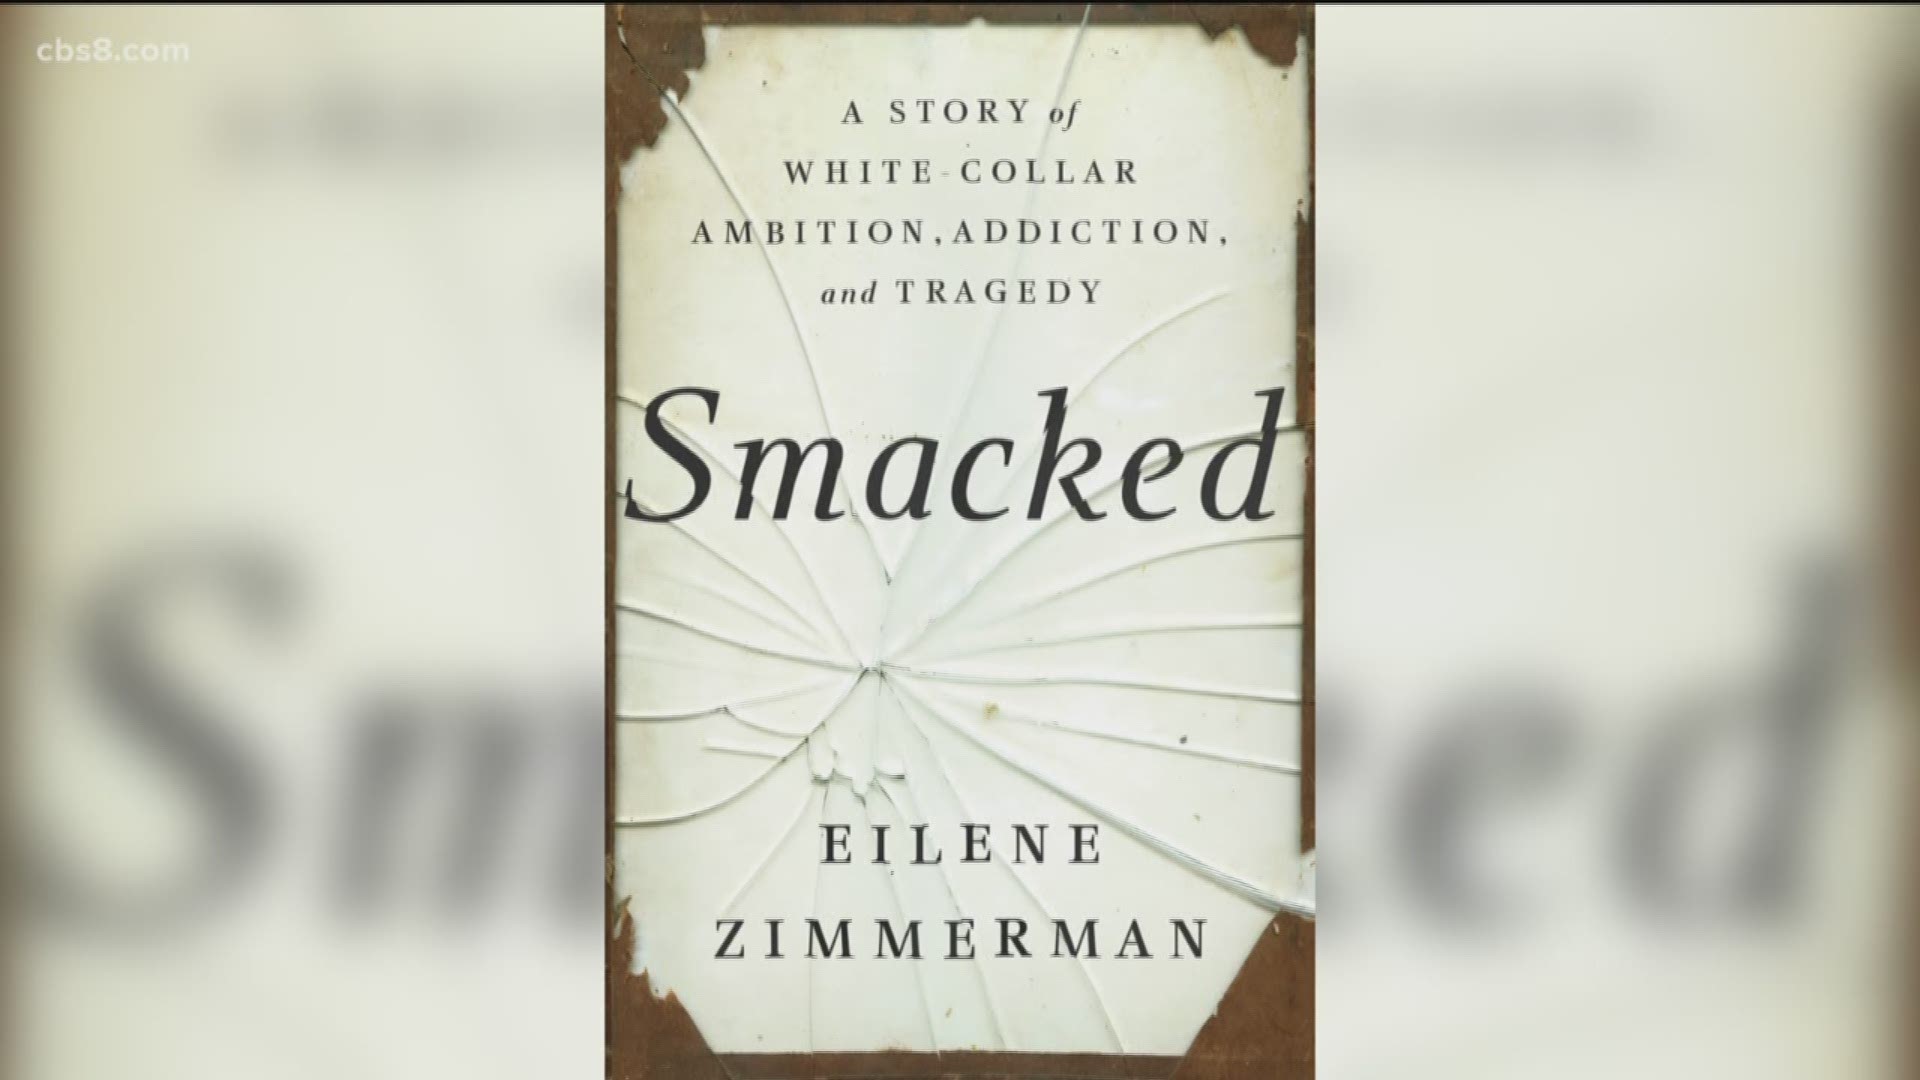 Eilene Zimmerman will be holding three separate events in San Diego to talk about the book and sign any copies.